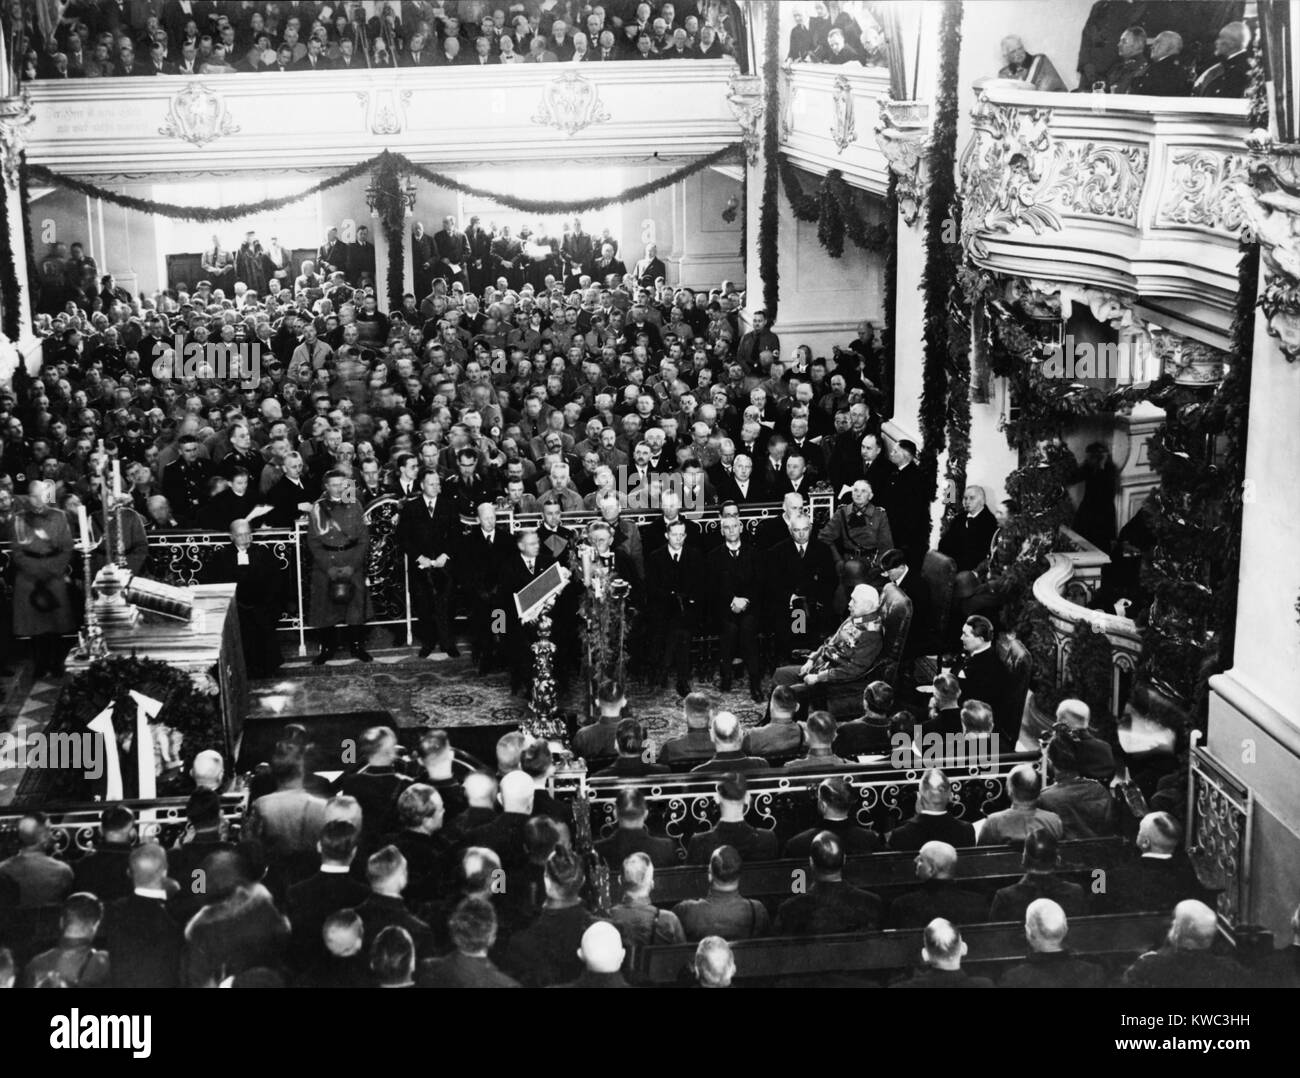 Paul von Hindenburg, Adolf Hitler, and Hermann Goering (lower right), March 21, 1933. They were in the Garrison Church in Potsdam for ceremonies opening the Reichstag session. Hitler was named Chancellor of Germany on Jan. 30, 1933. (BSLOC 2015 14 11) Stock Photo